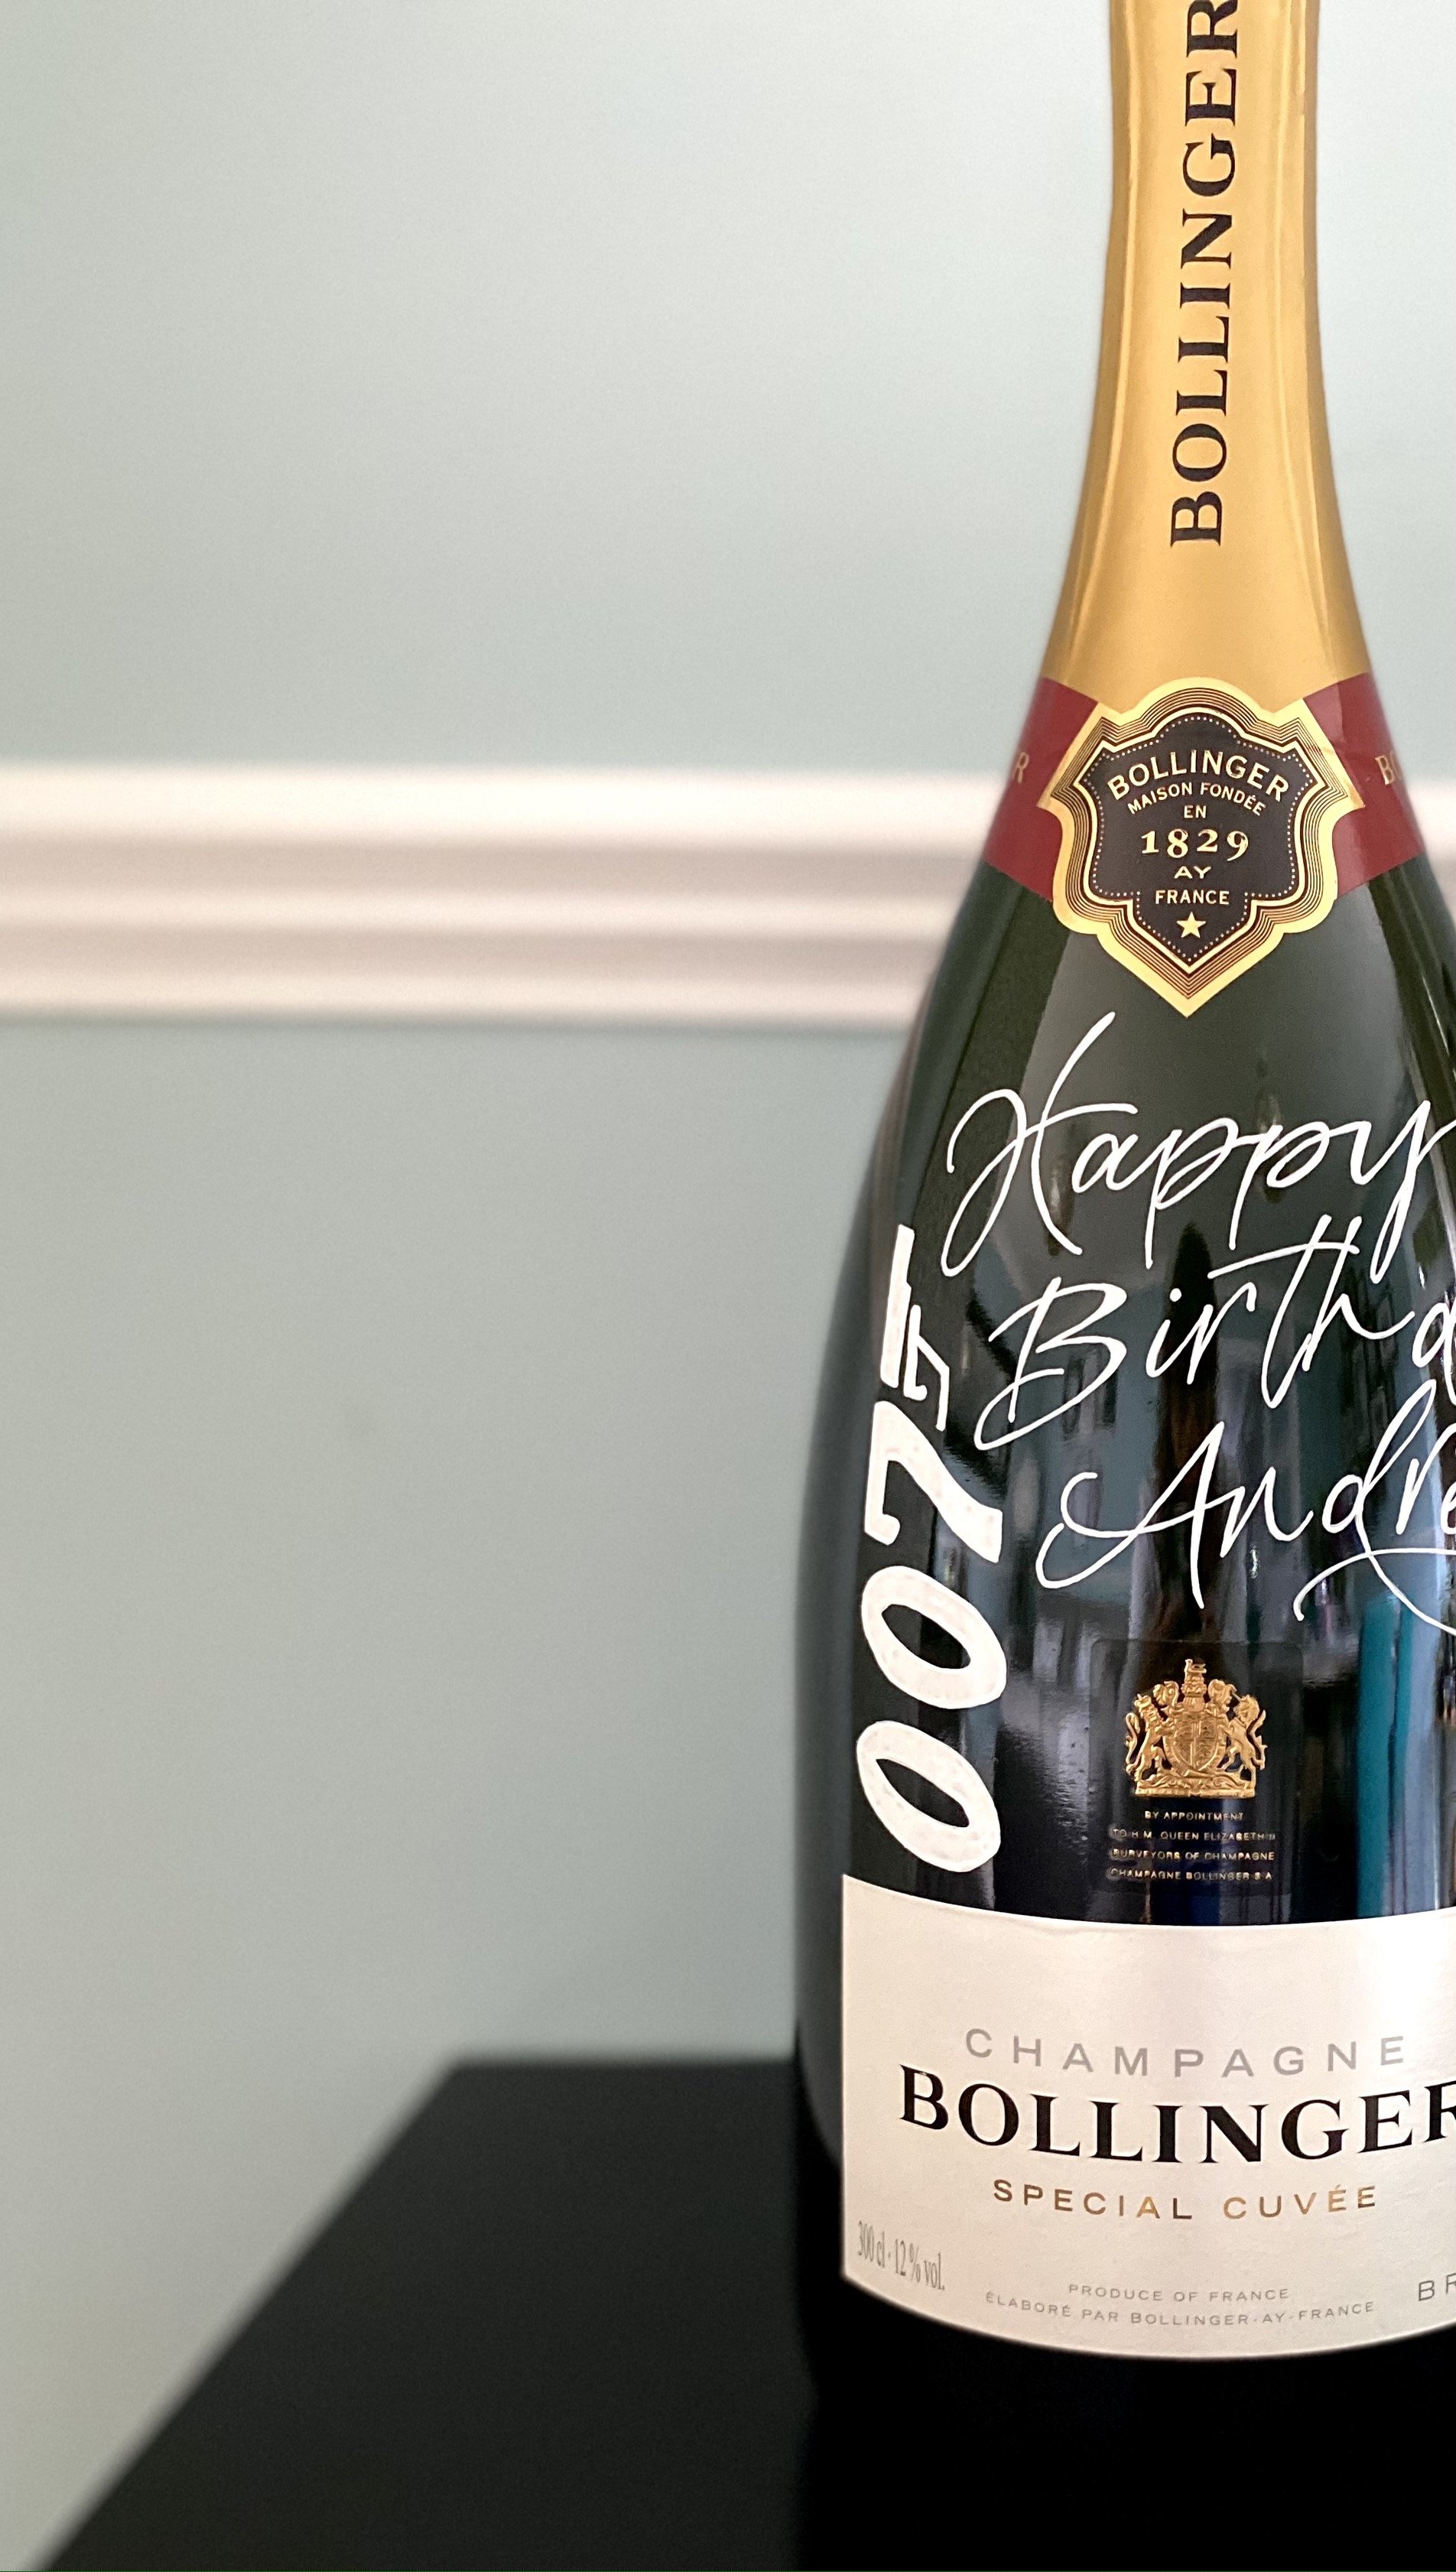 007 Personalised Champagne bottle with Mint Lettering script.JPG